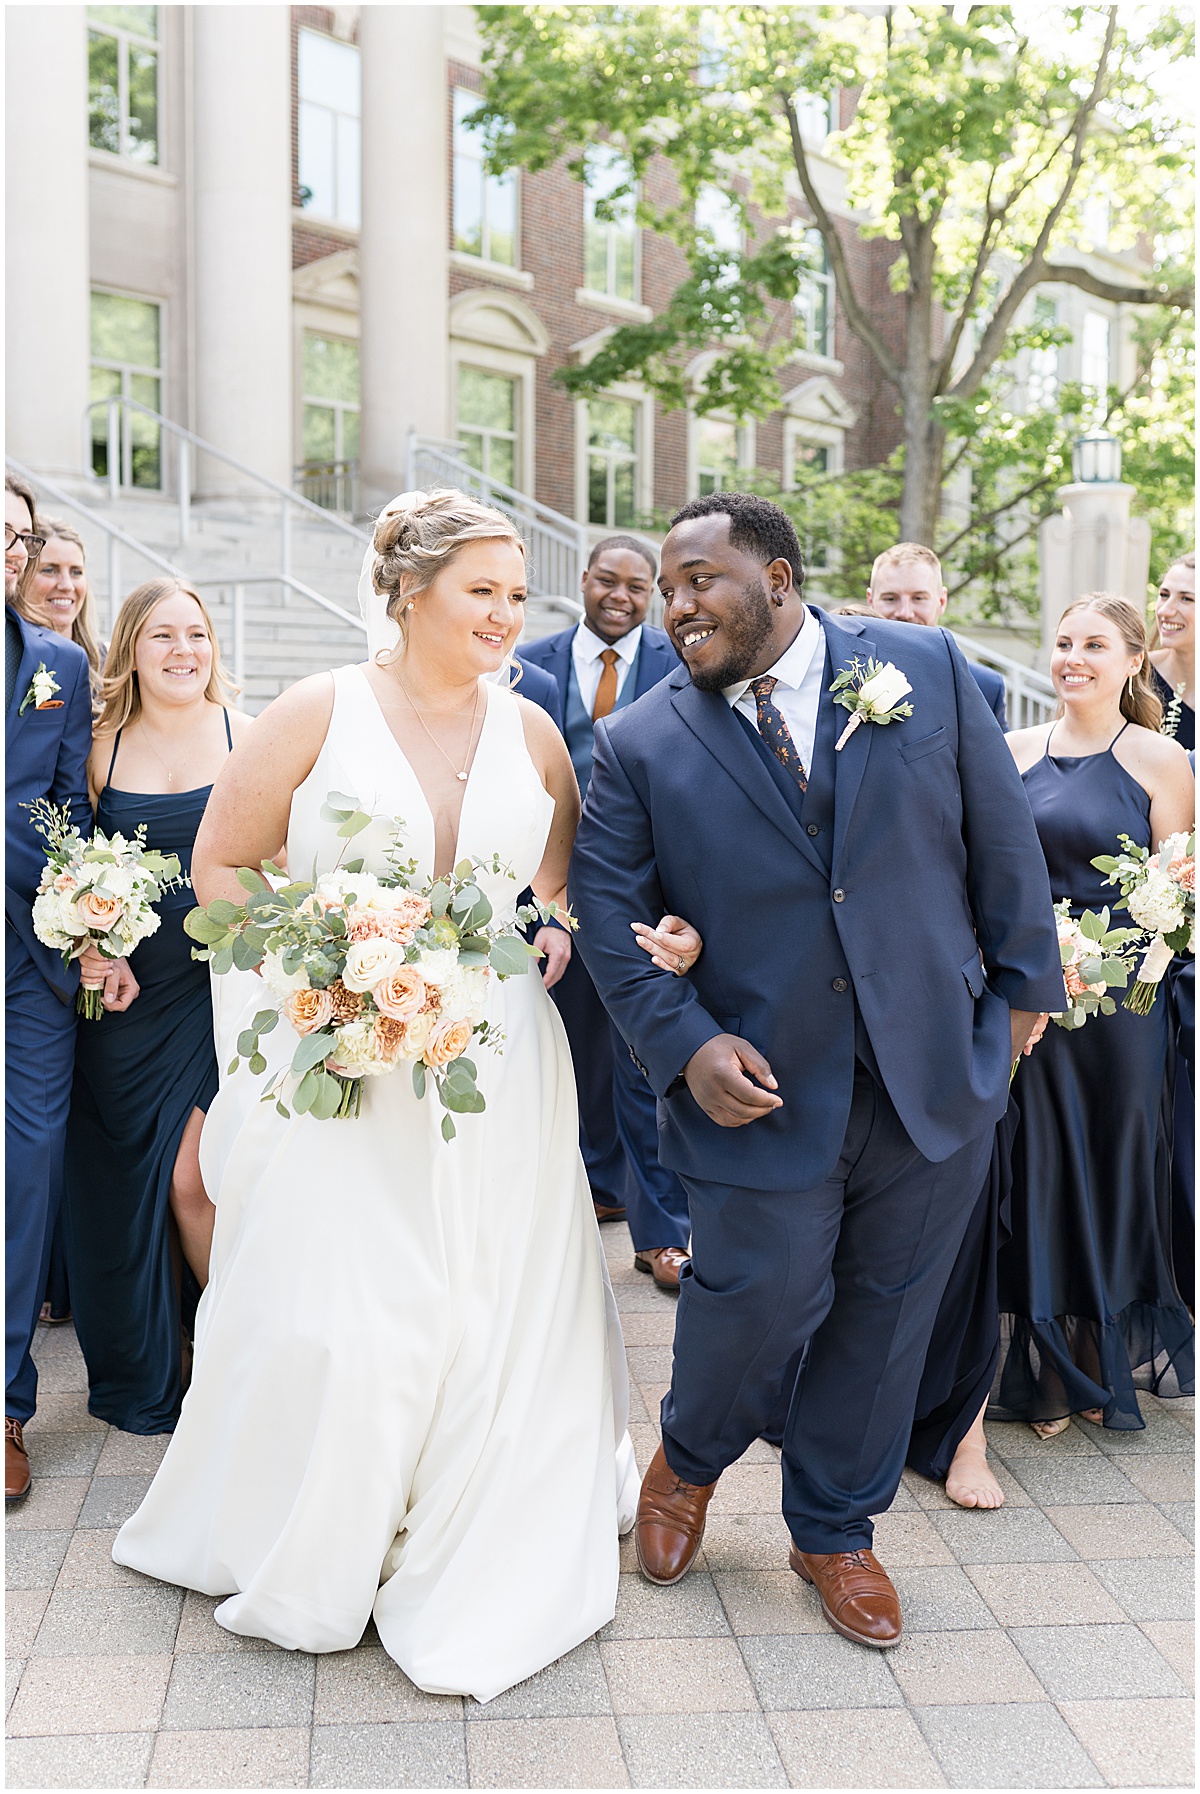 Bridal party walking together at Purdue Memorial Union wedding photographed by Victoria Rayburn Photography